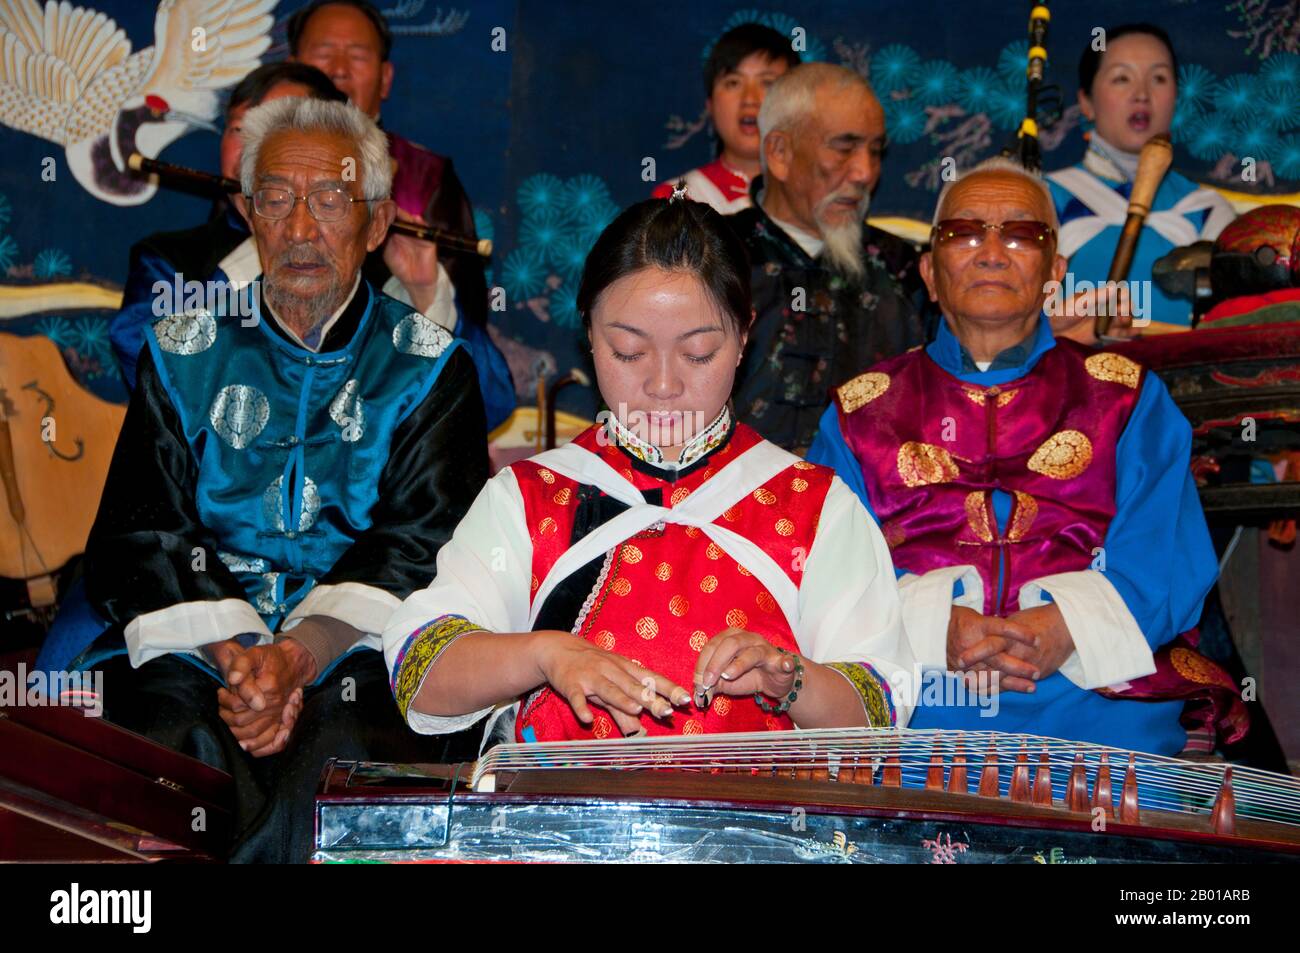 China: A woman plucks a guzheng, the Naxi (Nakhi) Folk Orchestra, Naxi Orchestra Hall, Lijiang Old Town, Yunnan Province.  Naxi music is 500 years old, and with its mixture of literary lyrics, poetic topics, and musical styles from the Tang, Song, and Yuan dynasties, as well as some Tibetan influences, it has developed its own unique style and traits. There are three main styles: Baisha, Dongjing, and Huangjing, all using traditional Chinese instruments.  The Naxi or Nakhi are an ethnic group inhabiting the foothills of the Himalayas in the northwestern part of Yunnan Province. Stock Photo